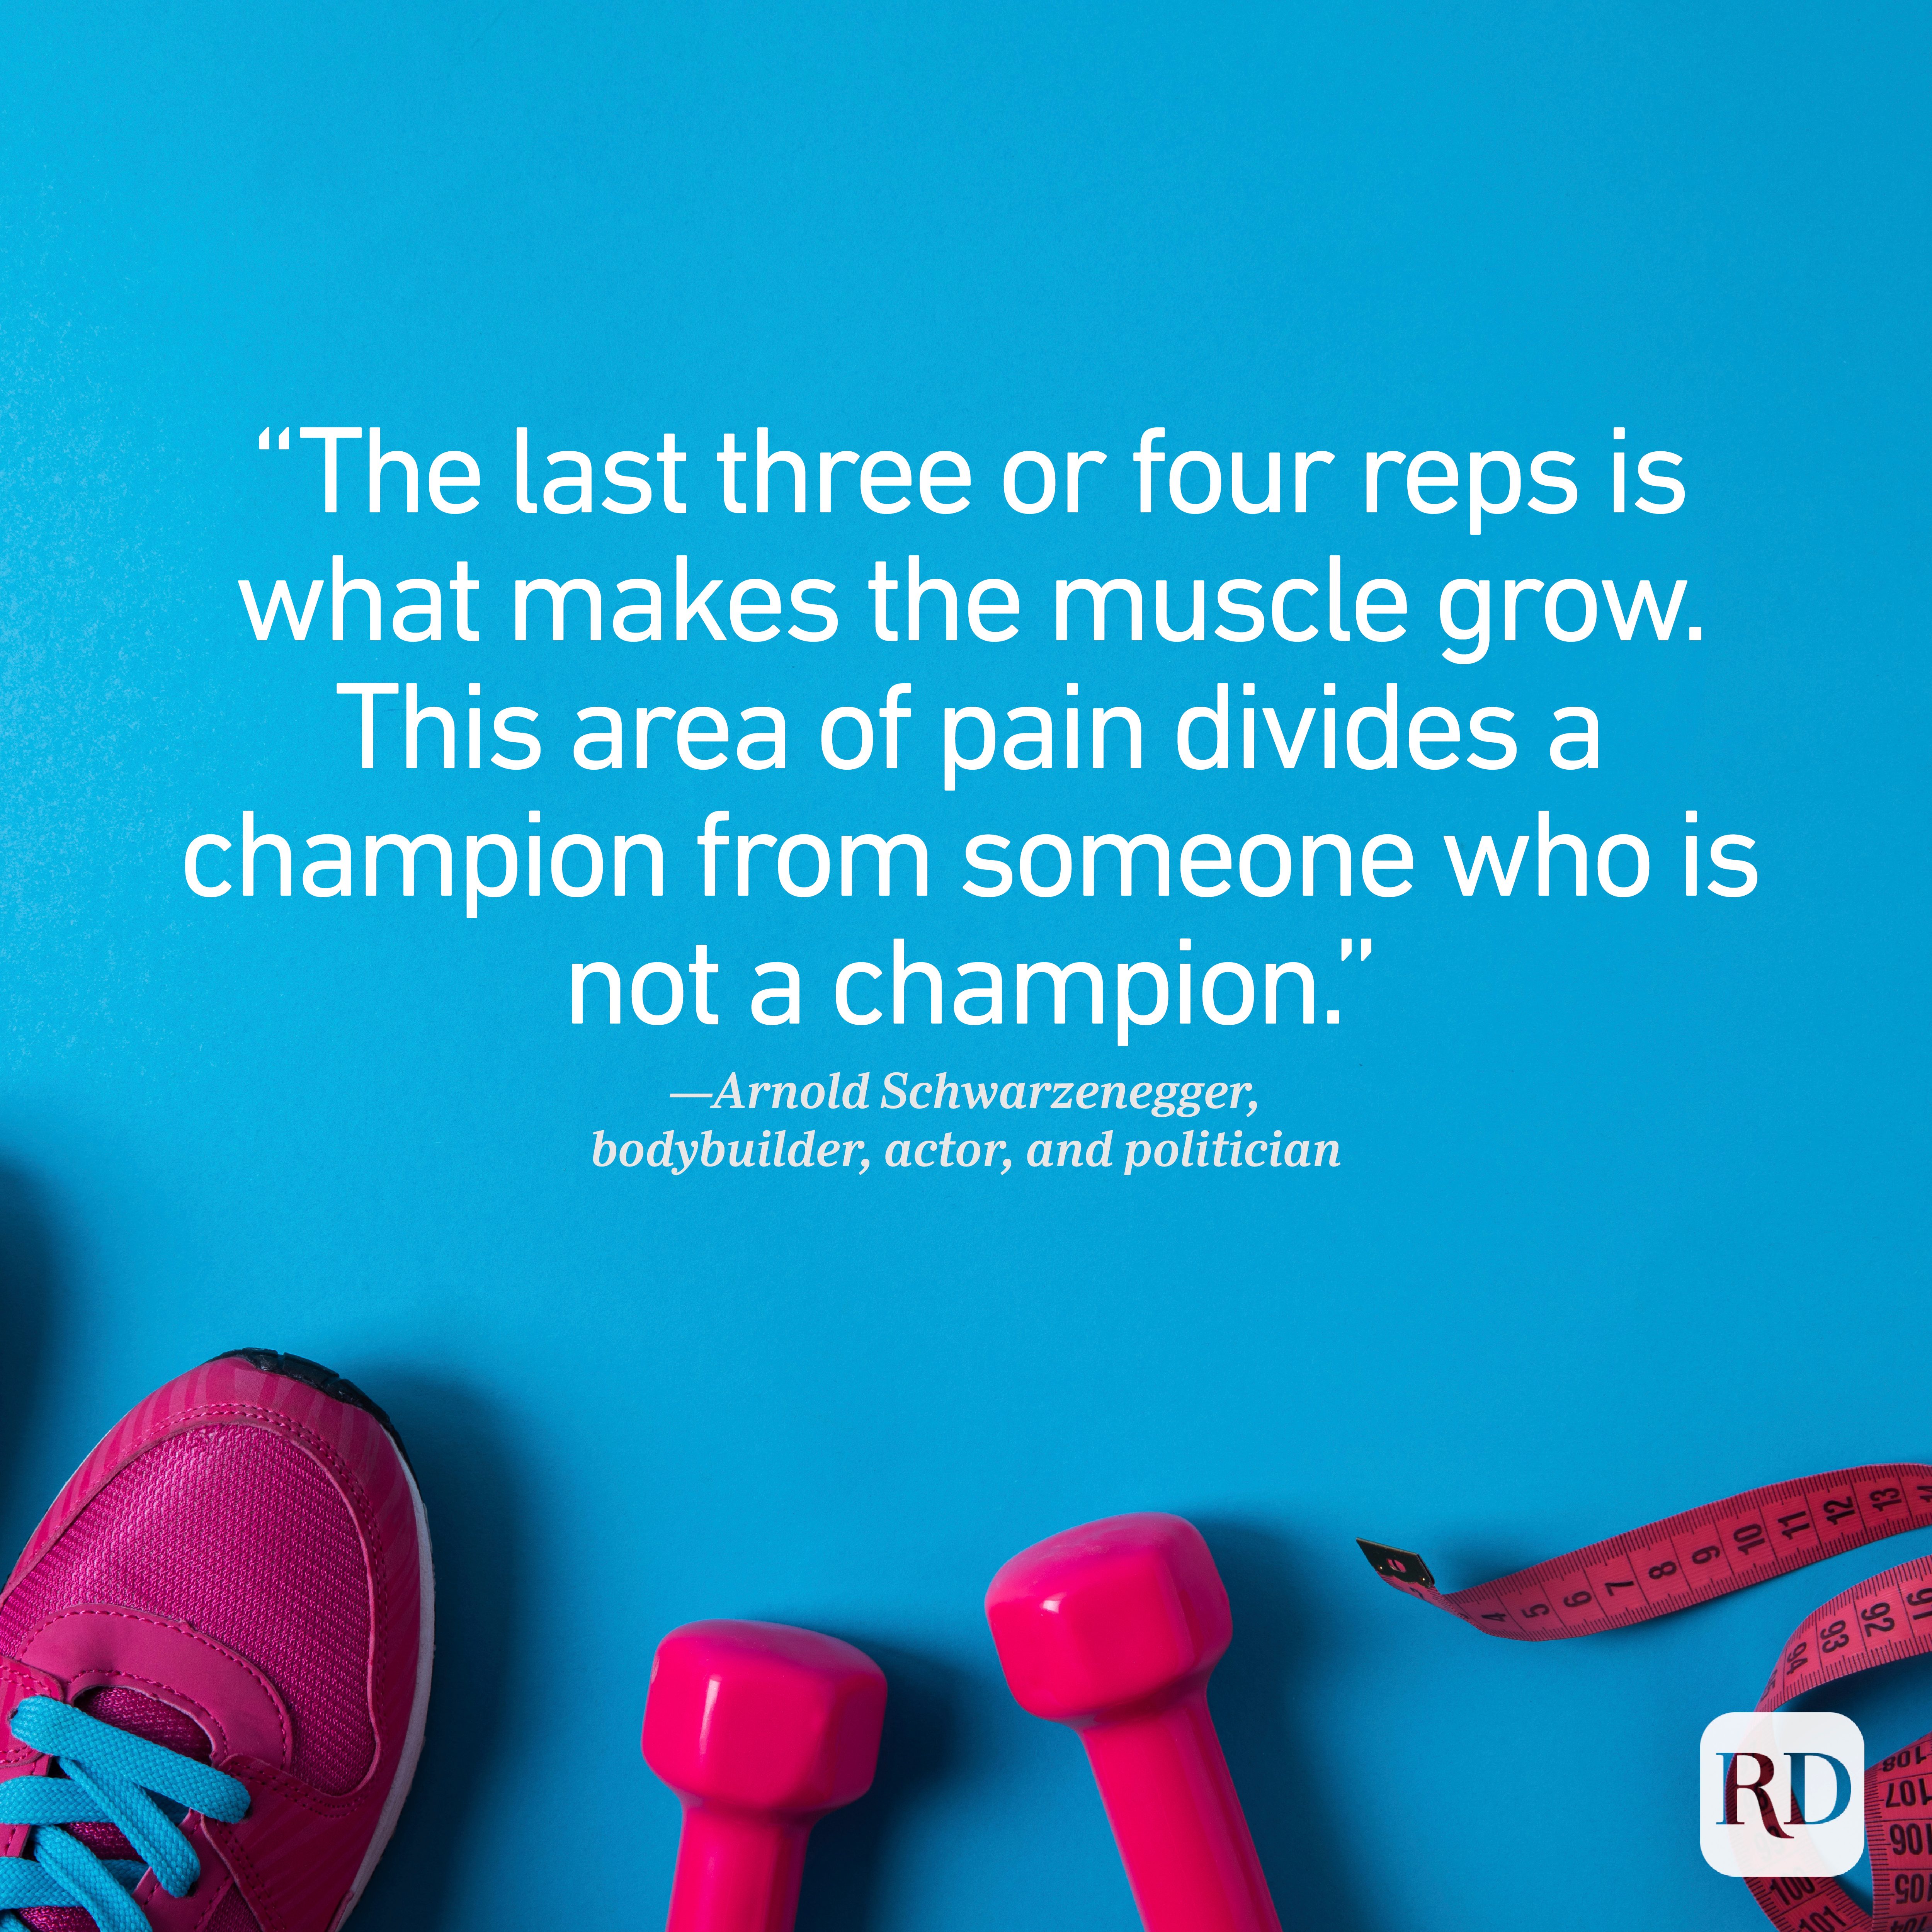 Fitness Motivational Quotes by Experts - Inspire Your Workout